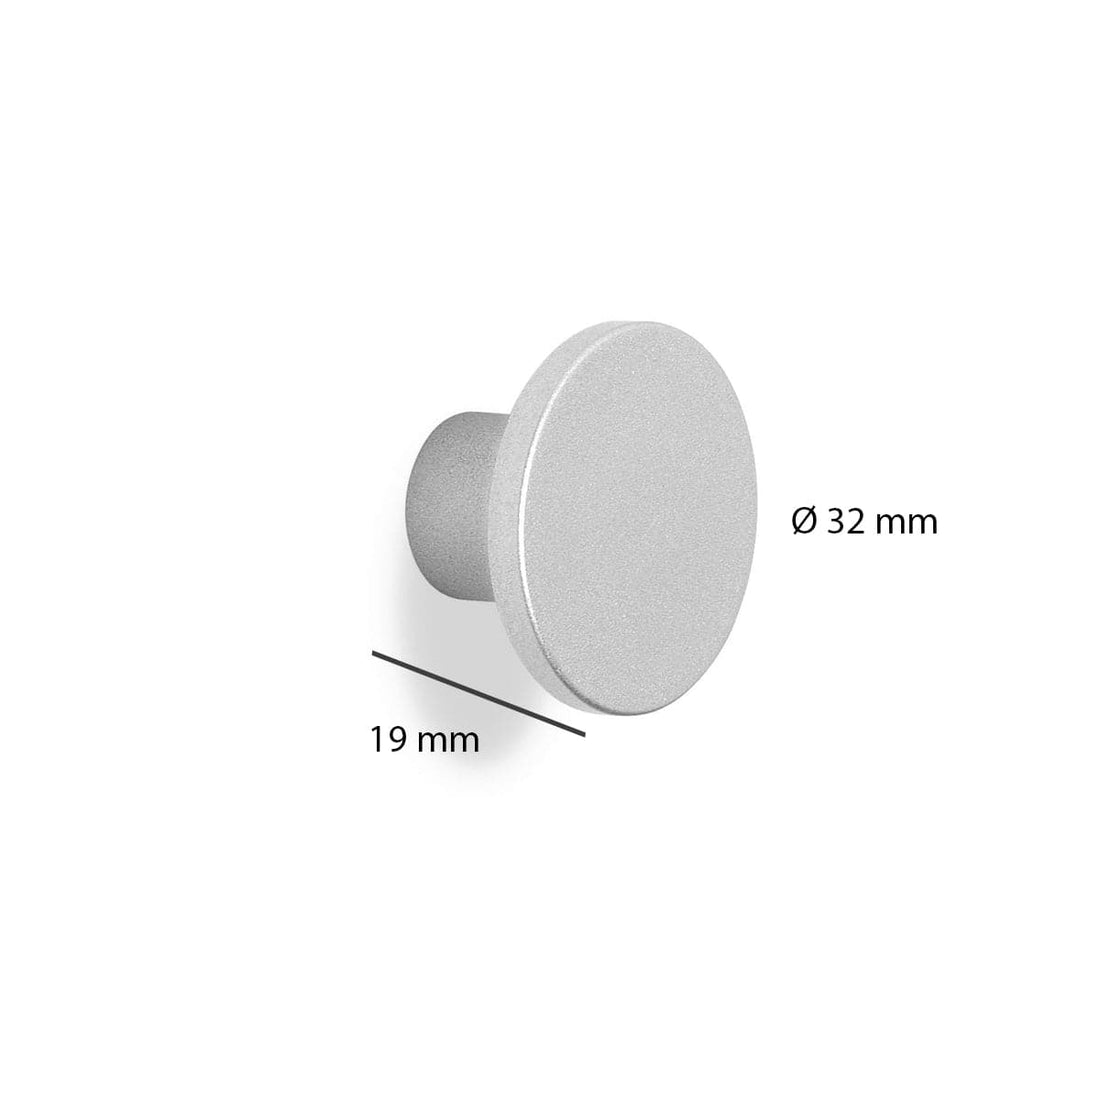 2 KNOBS D 32 MM H 19 MM IN SATIN CHROME RECYCLED PLASTIC